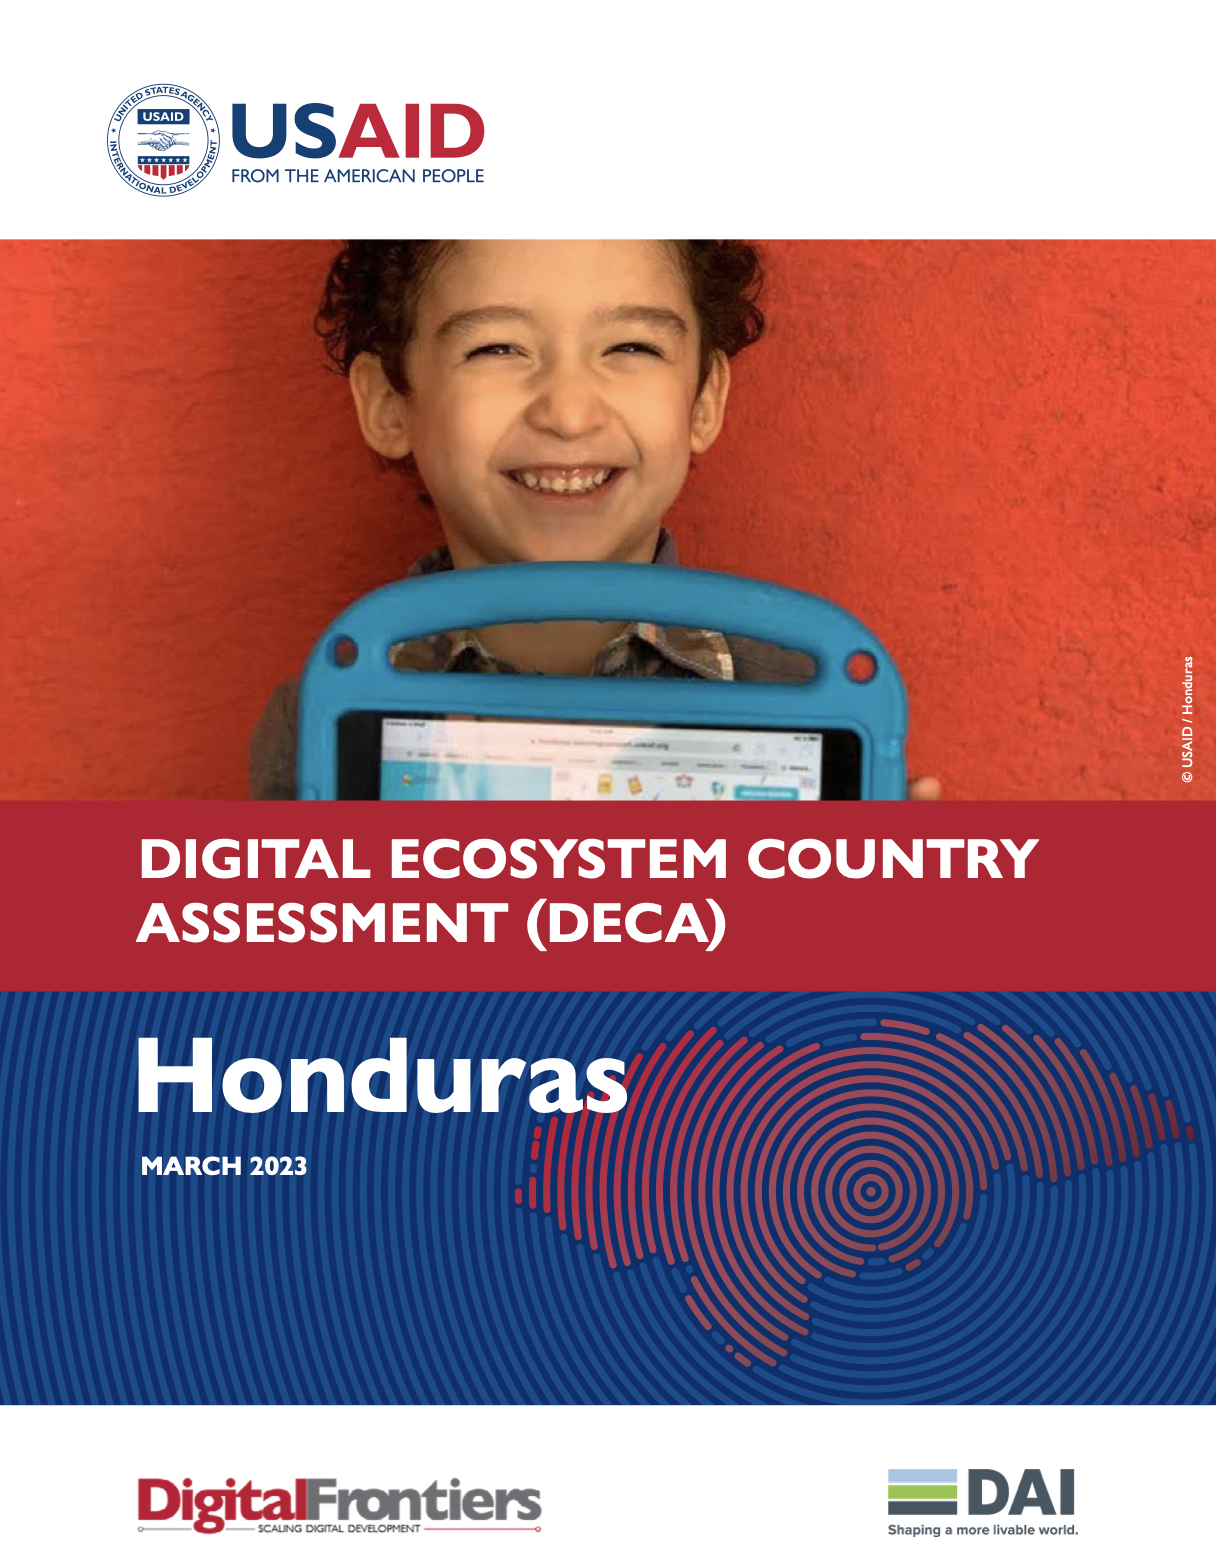 Cover photo for Honduras' Digital Ecosystem Country Assessment (DECA) of a little boy holding his device.